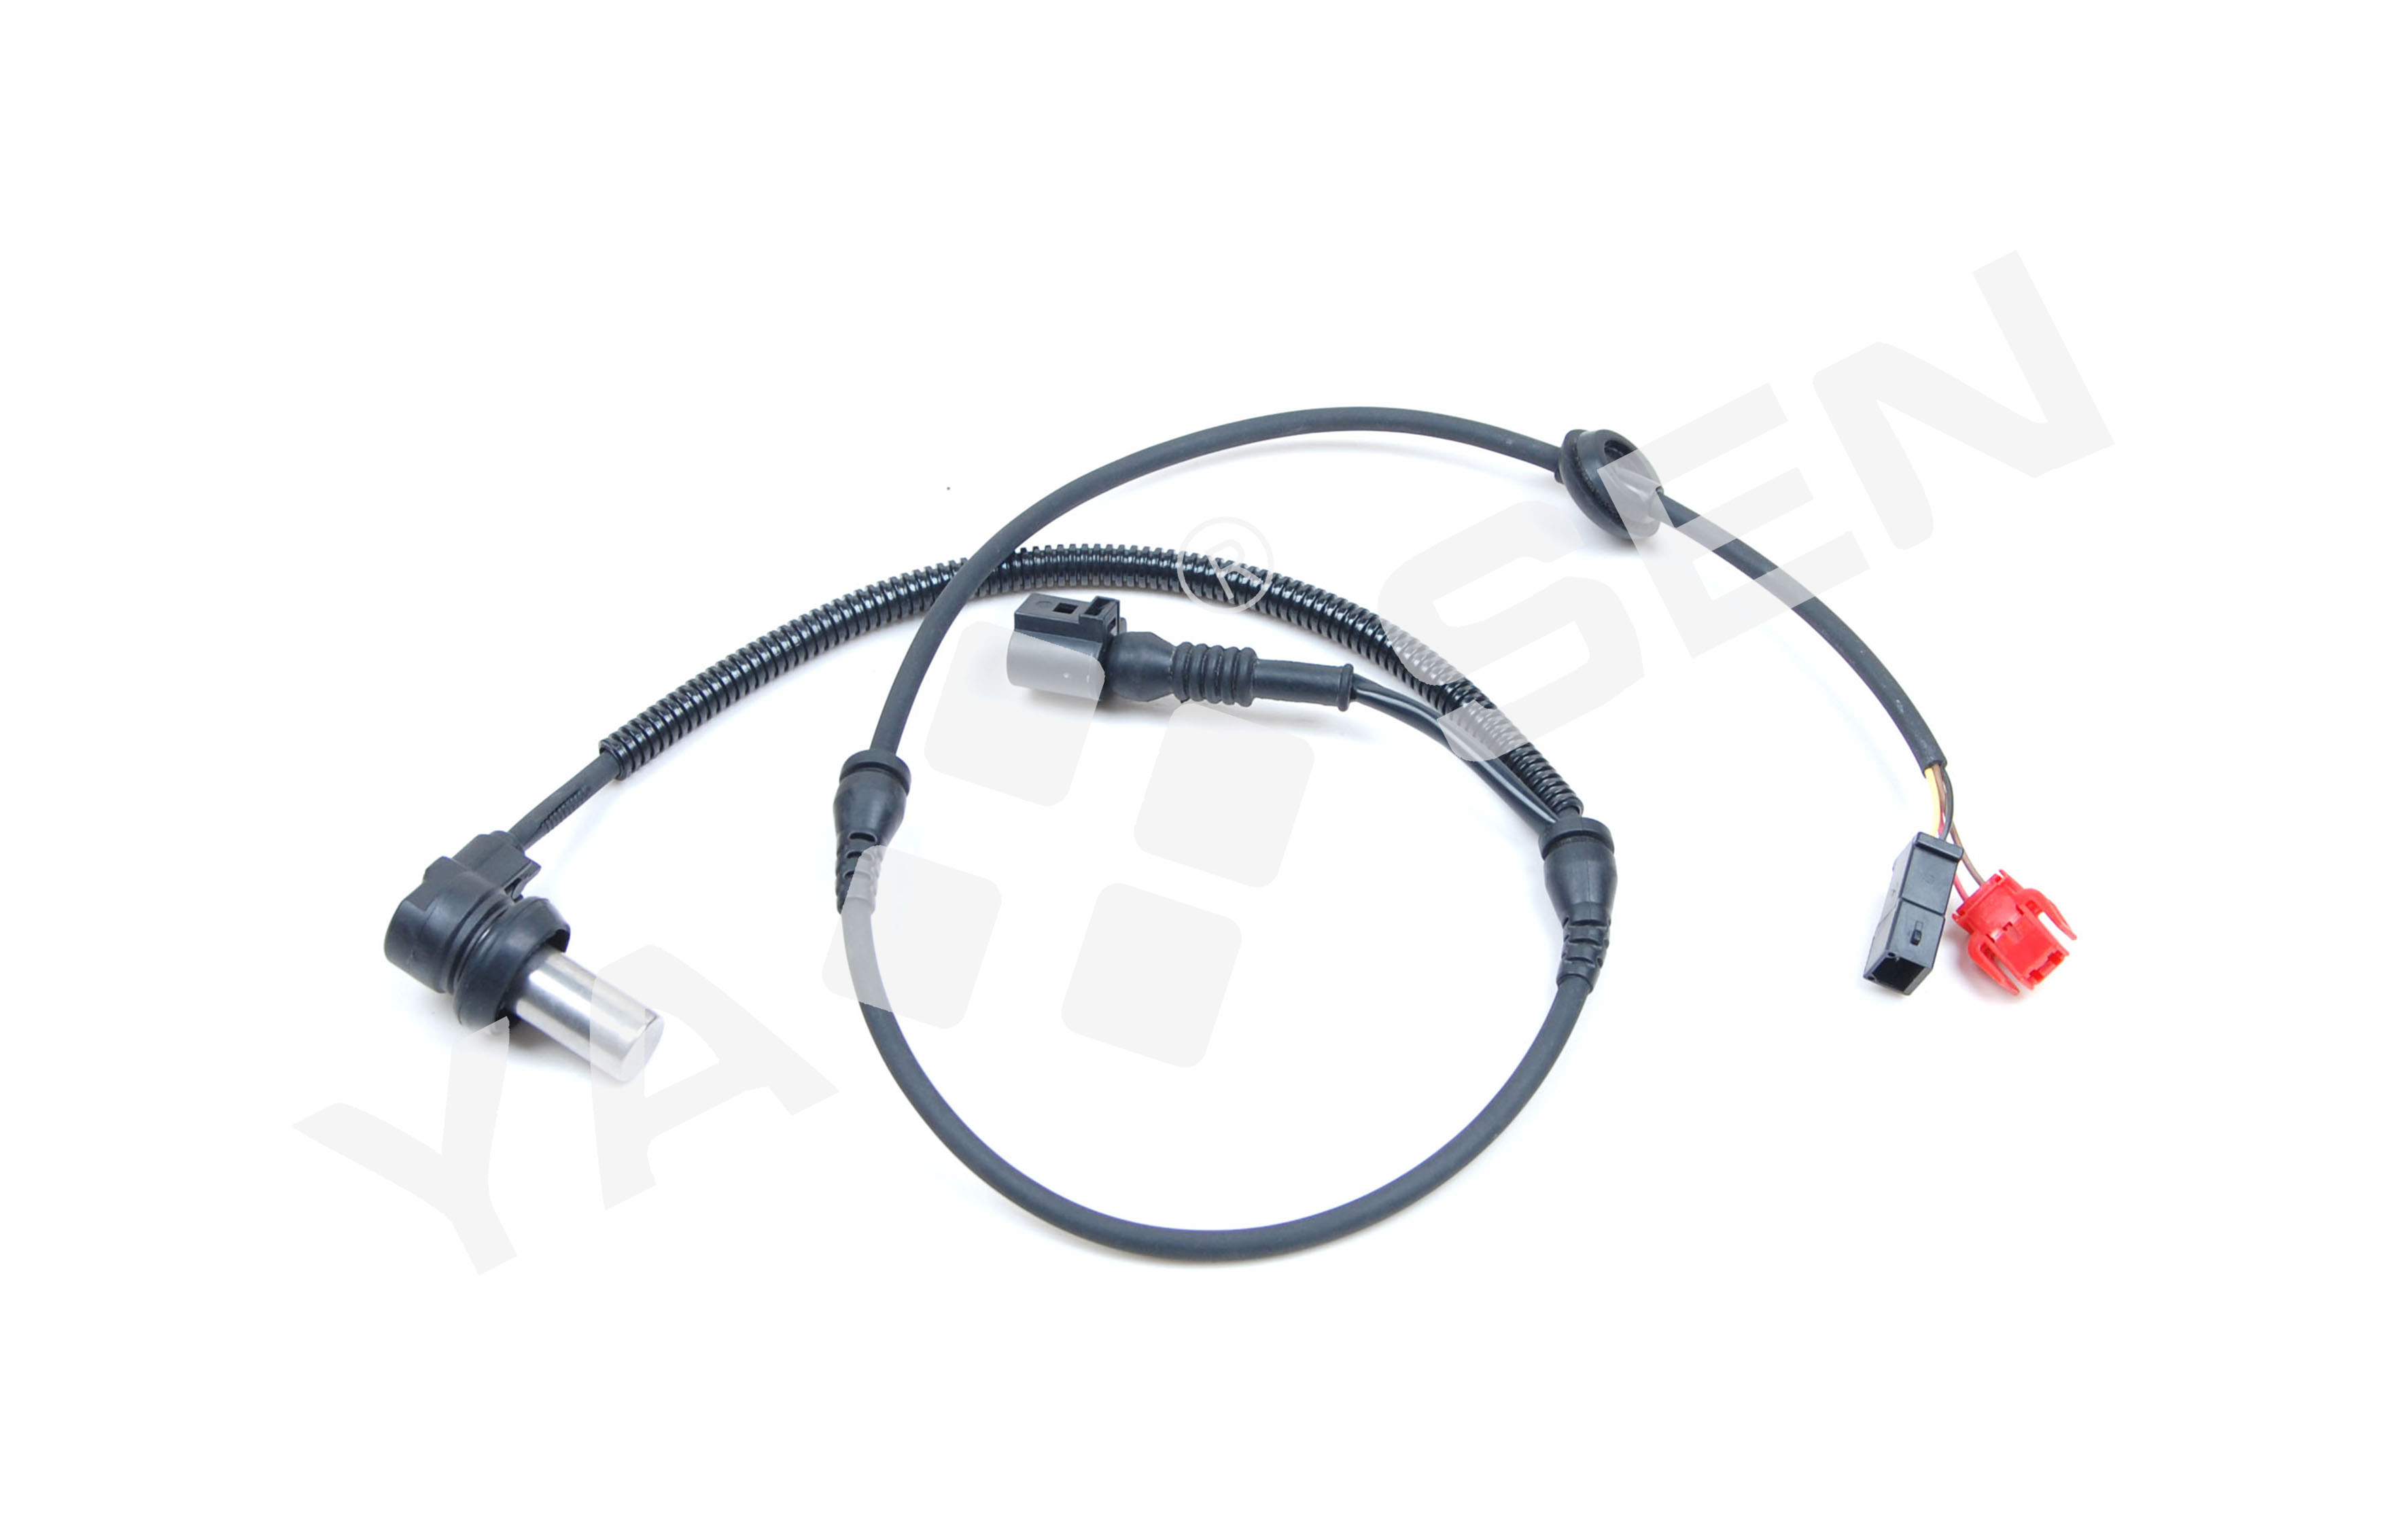 Front axle left and right ABS Sensor Wheel Speed Sensor for AUDI A6, 8D0927803B 8D0927803C 4B0927803